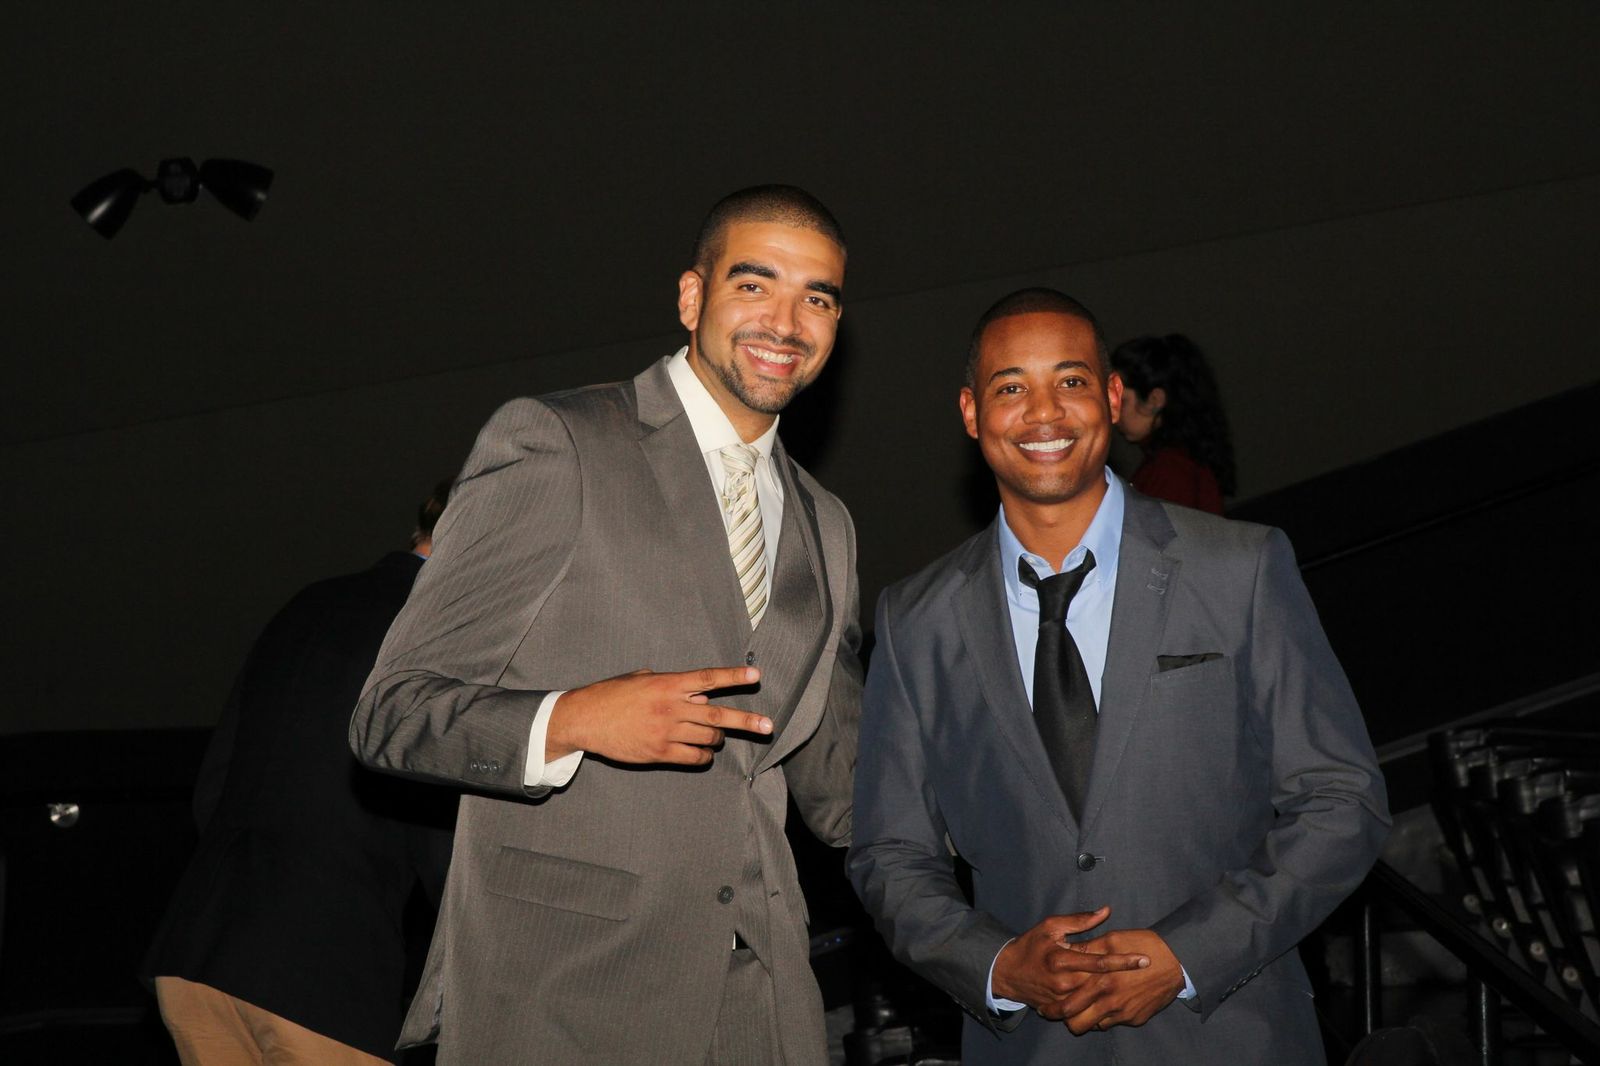 Producers of The Championship Rounds, MD Walton and Derrex Brady at the 2013 Los Angeles screening.